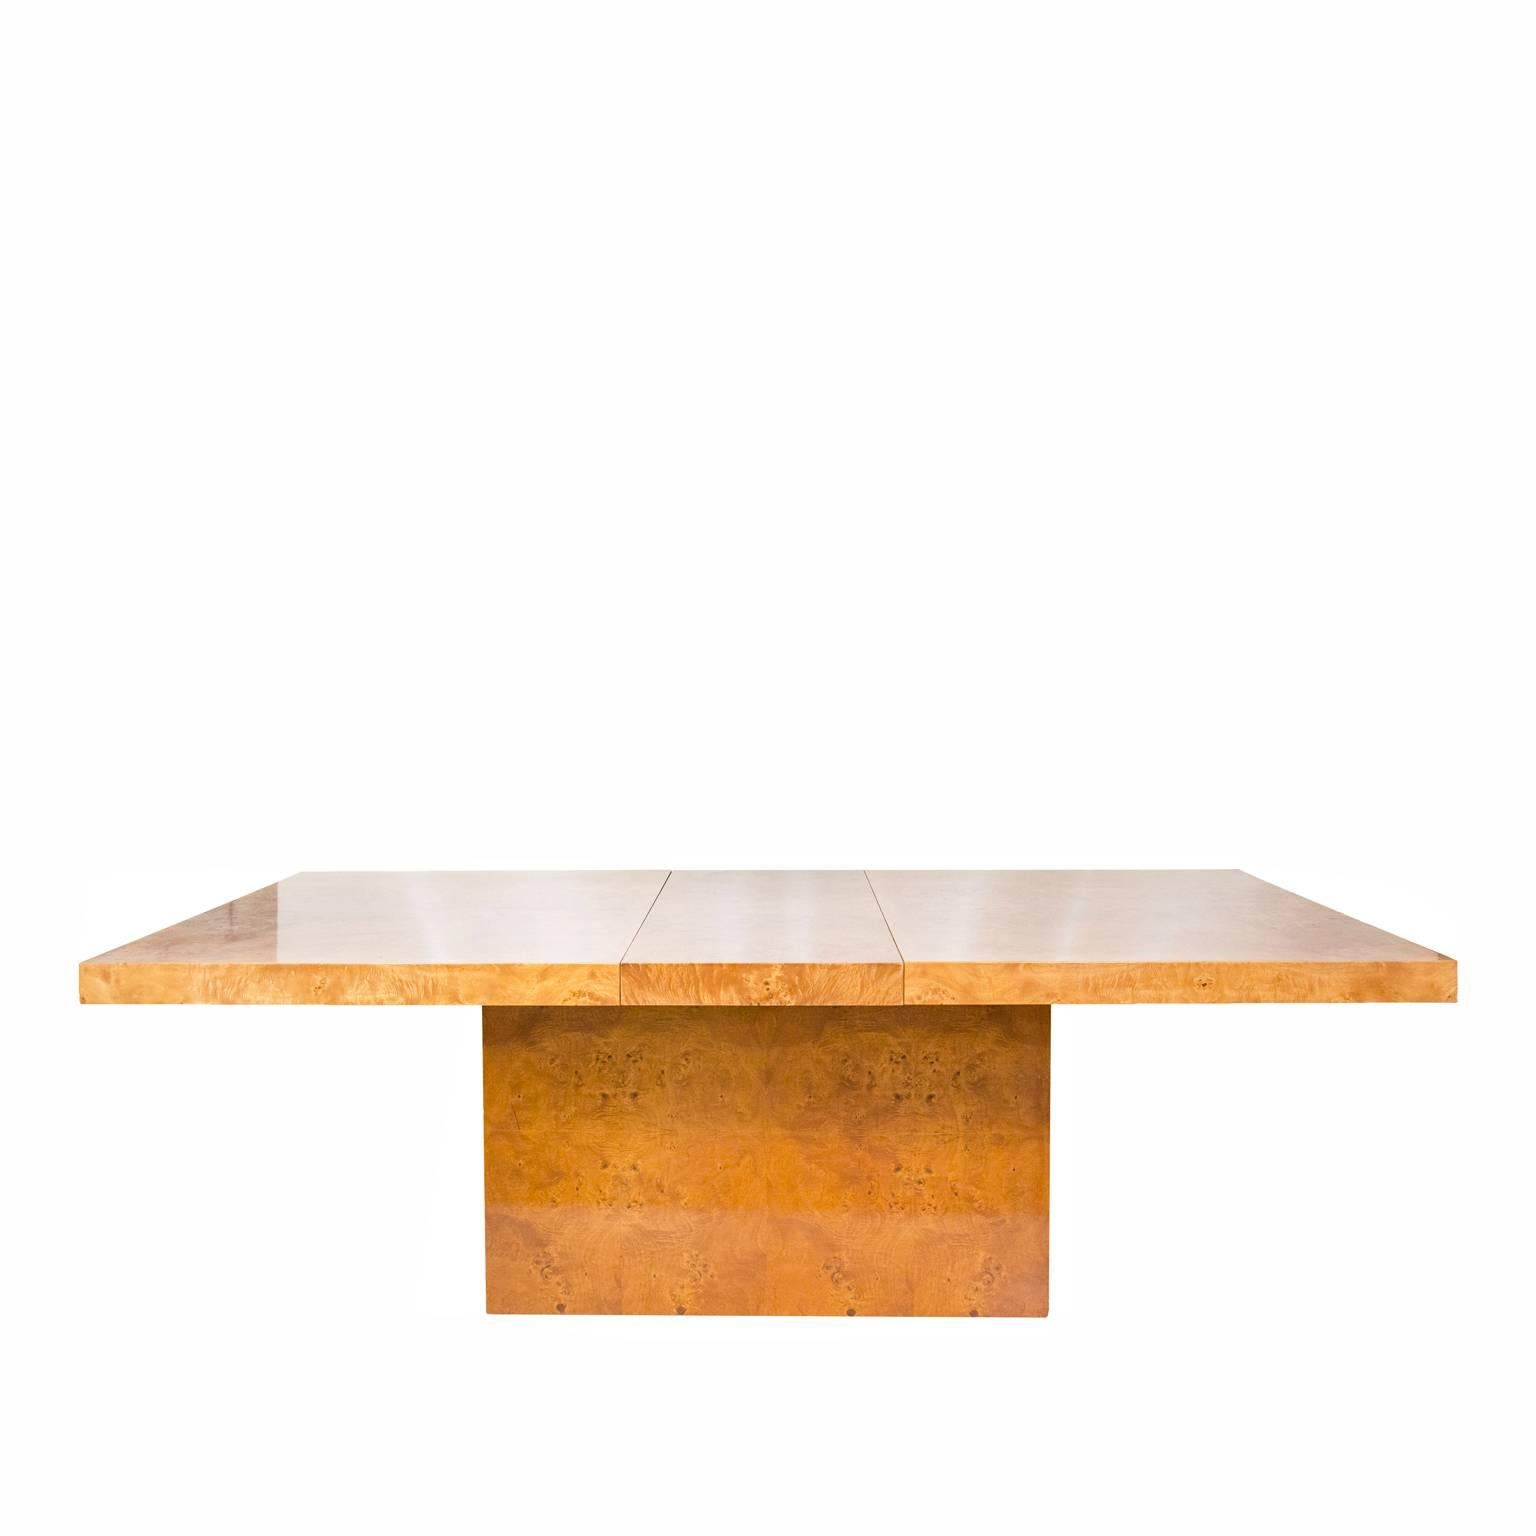 Milo Baughman burl wood dining table. Made of burled olive wood, this gorgeous piece extends via a pair of 18